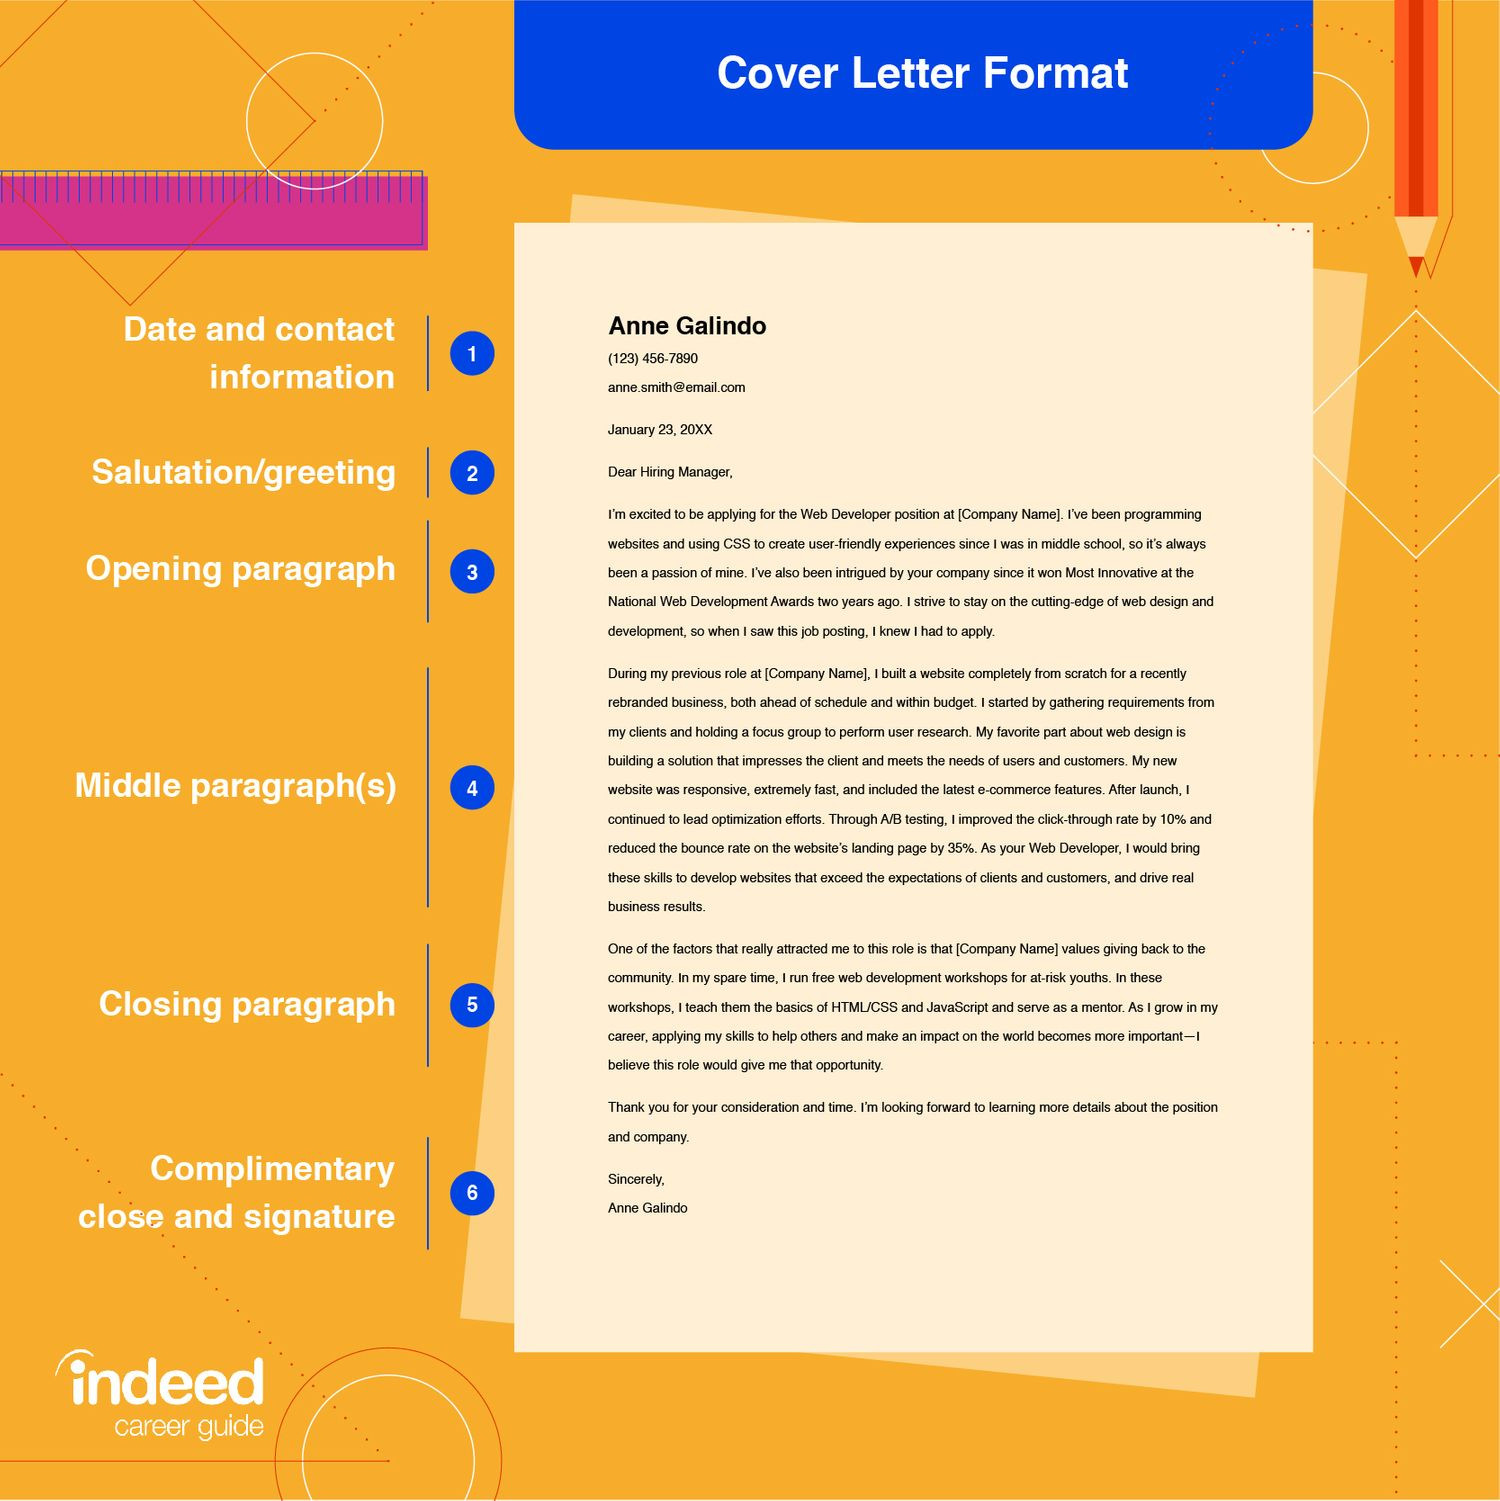 how to include a referral in your cover letter